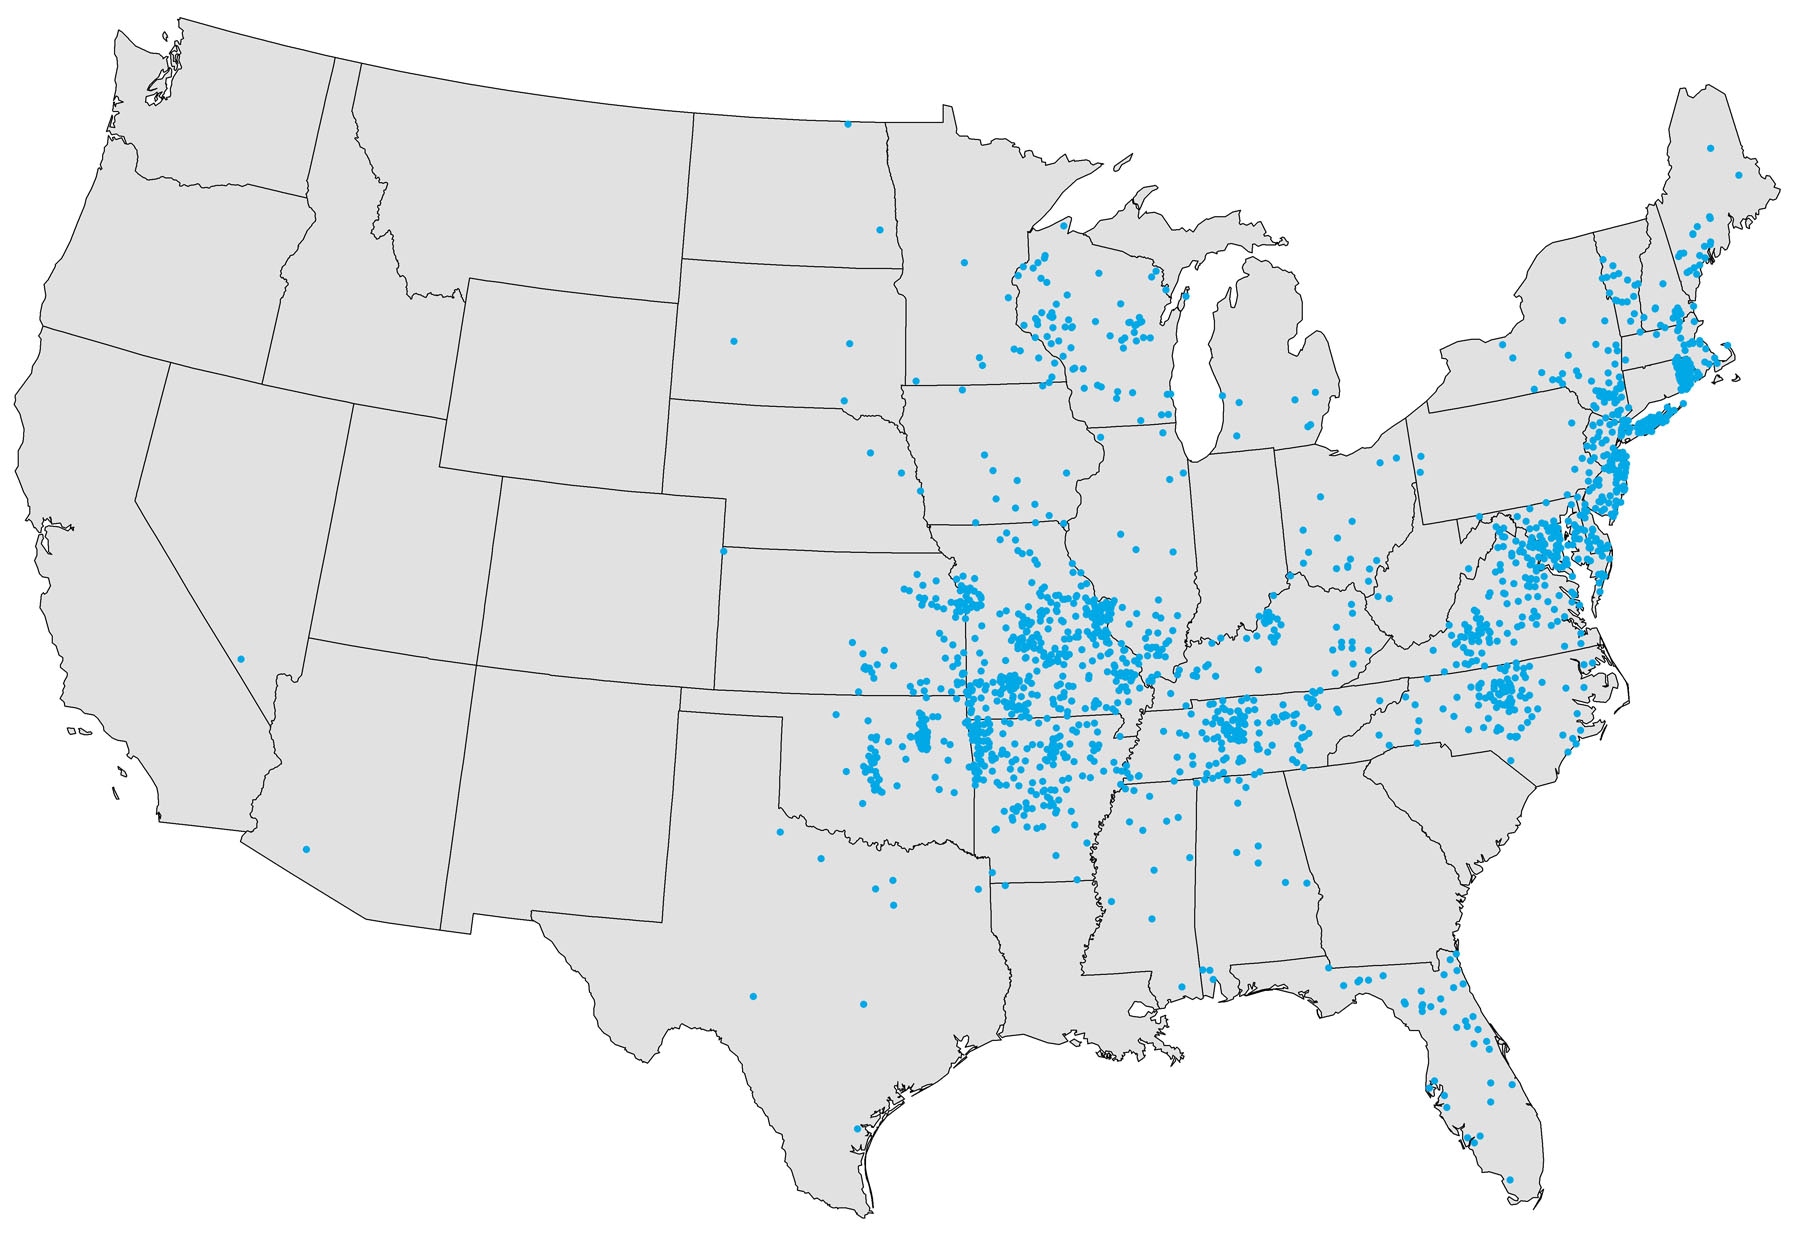 US map showing where cases of Ehrlichiosis have been reported. Cases are concentrated in the Eastern half of the U.S.